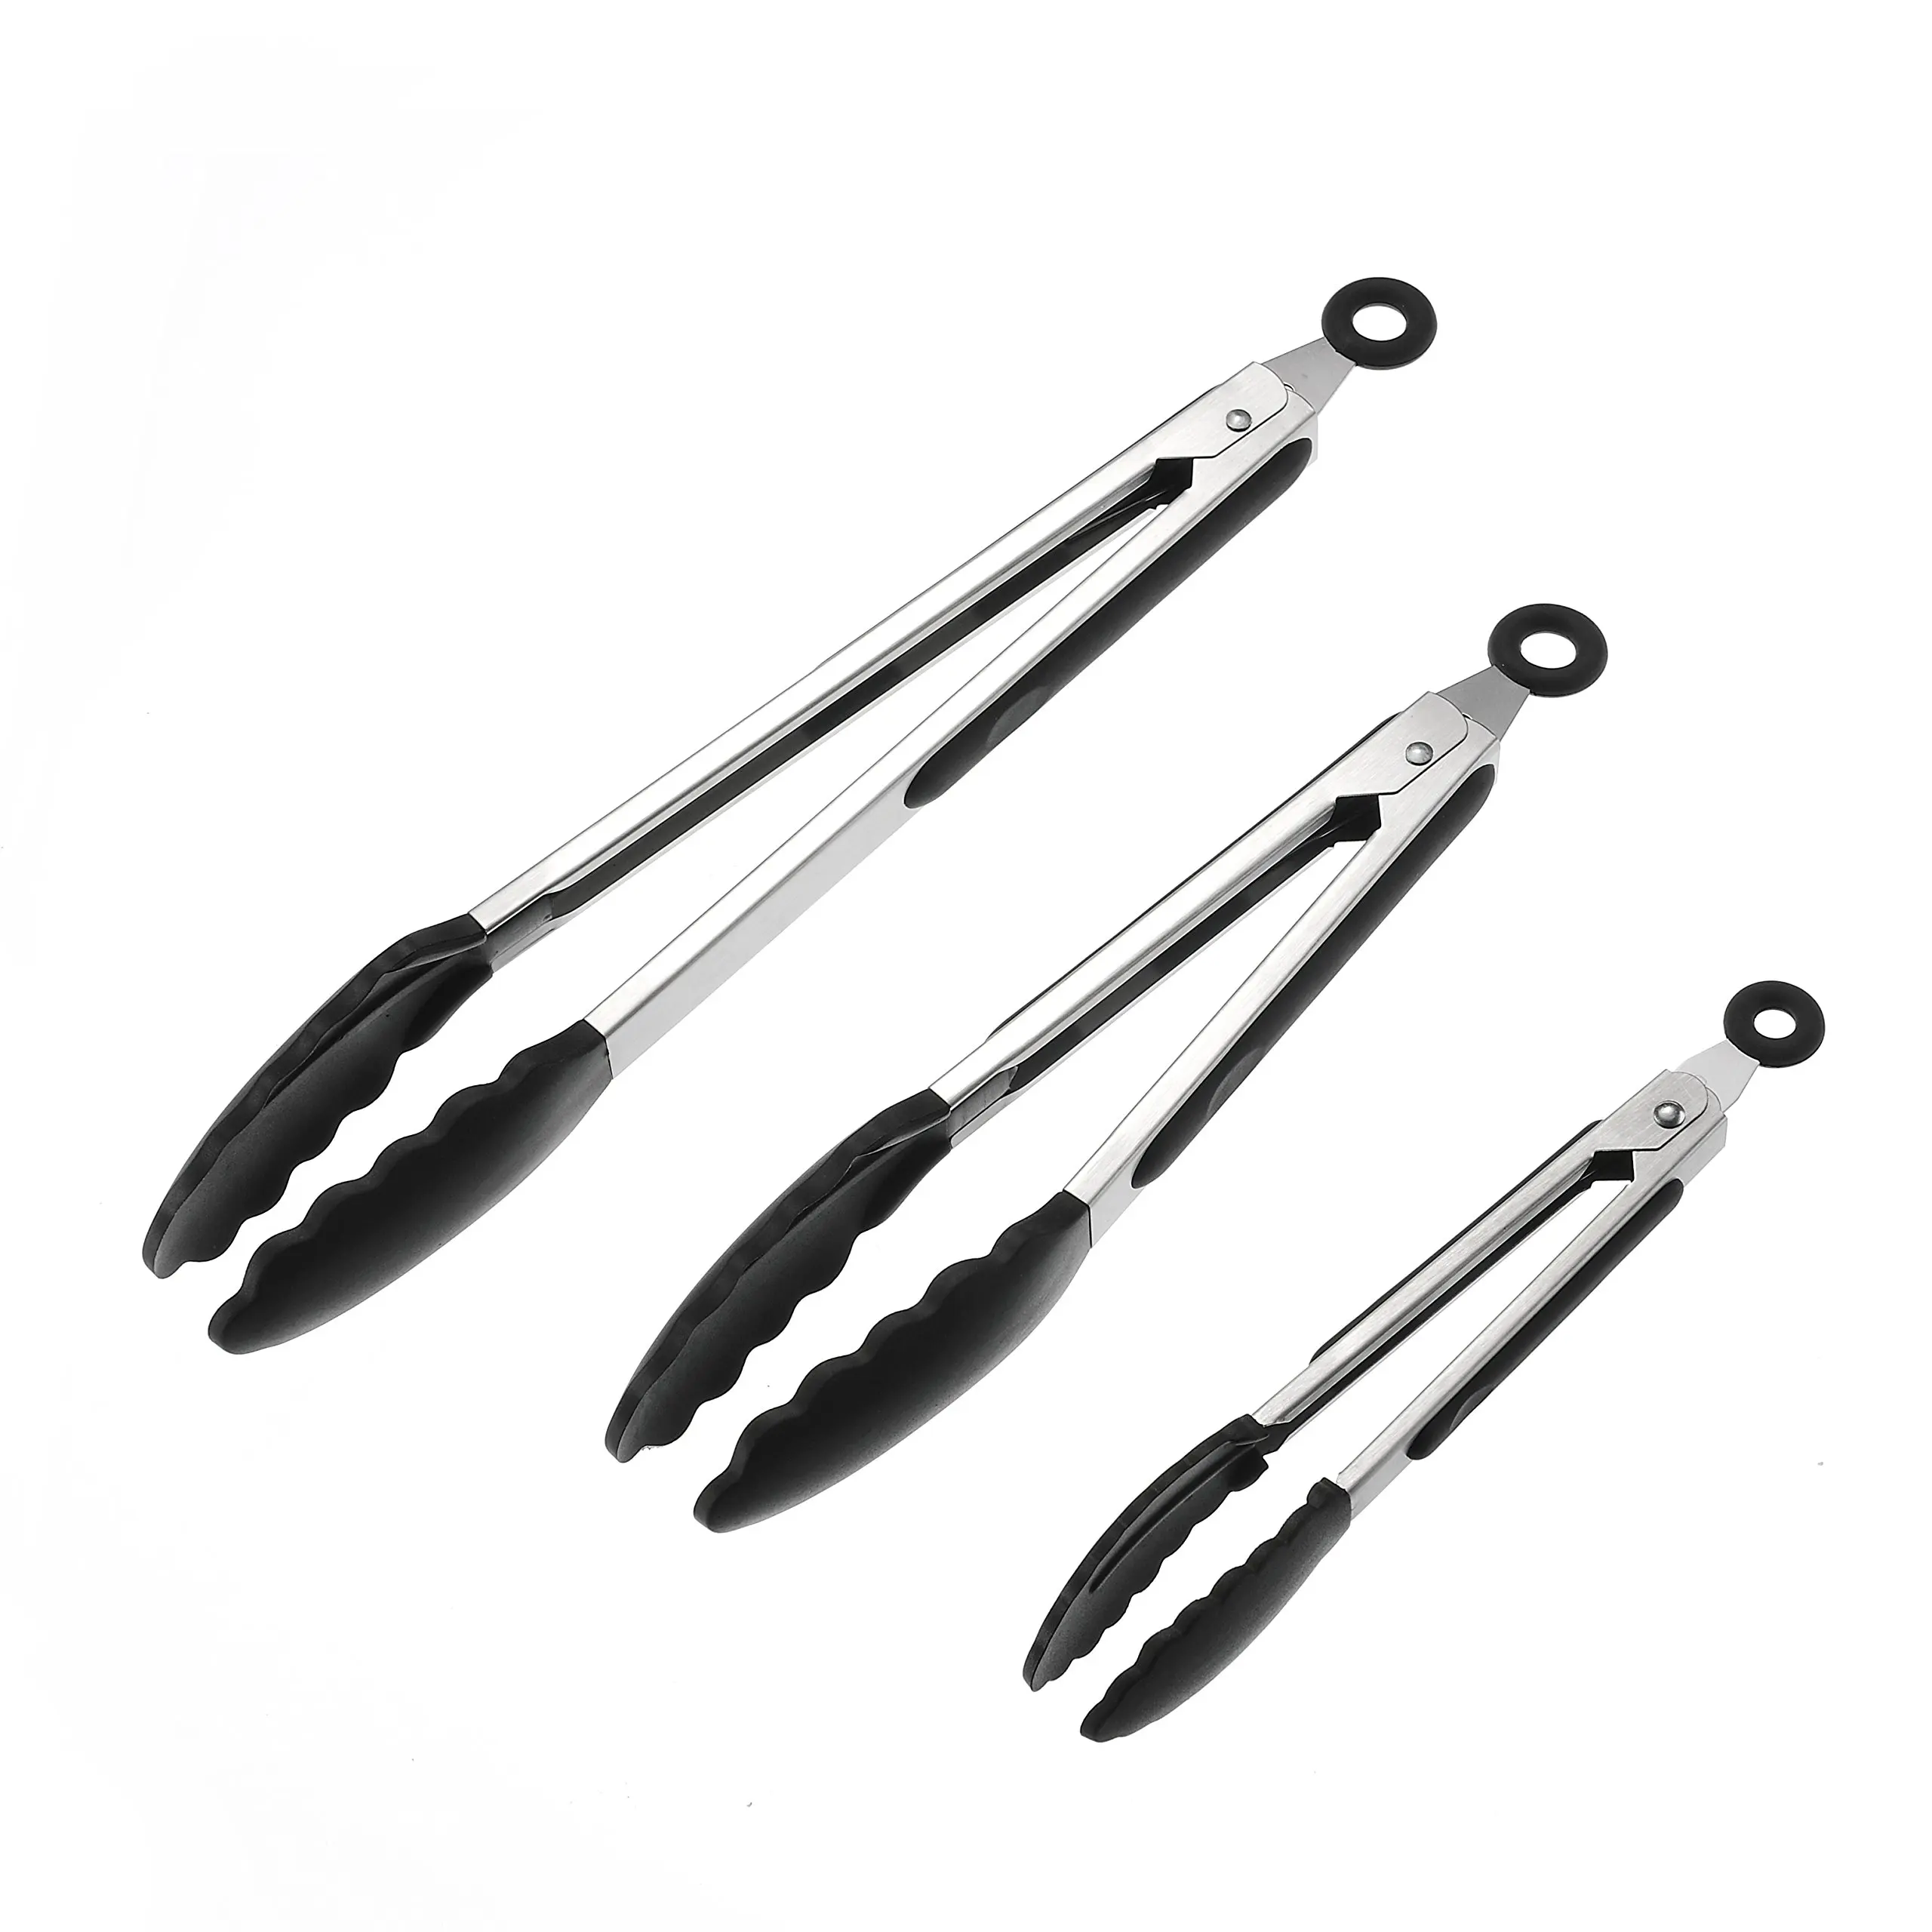 Cheap Best Silicone Tongs Find Best Silicone Tongs Deals On Line At